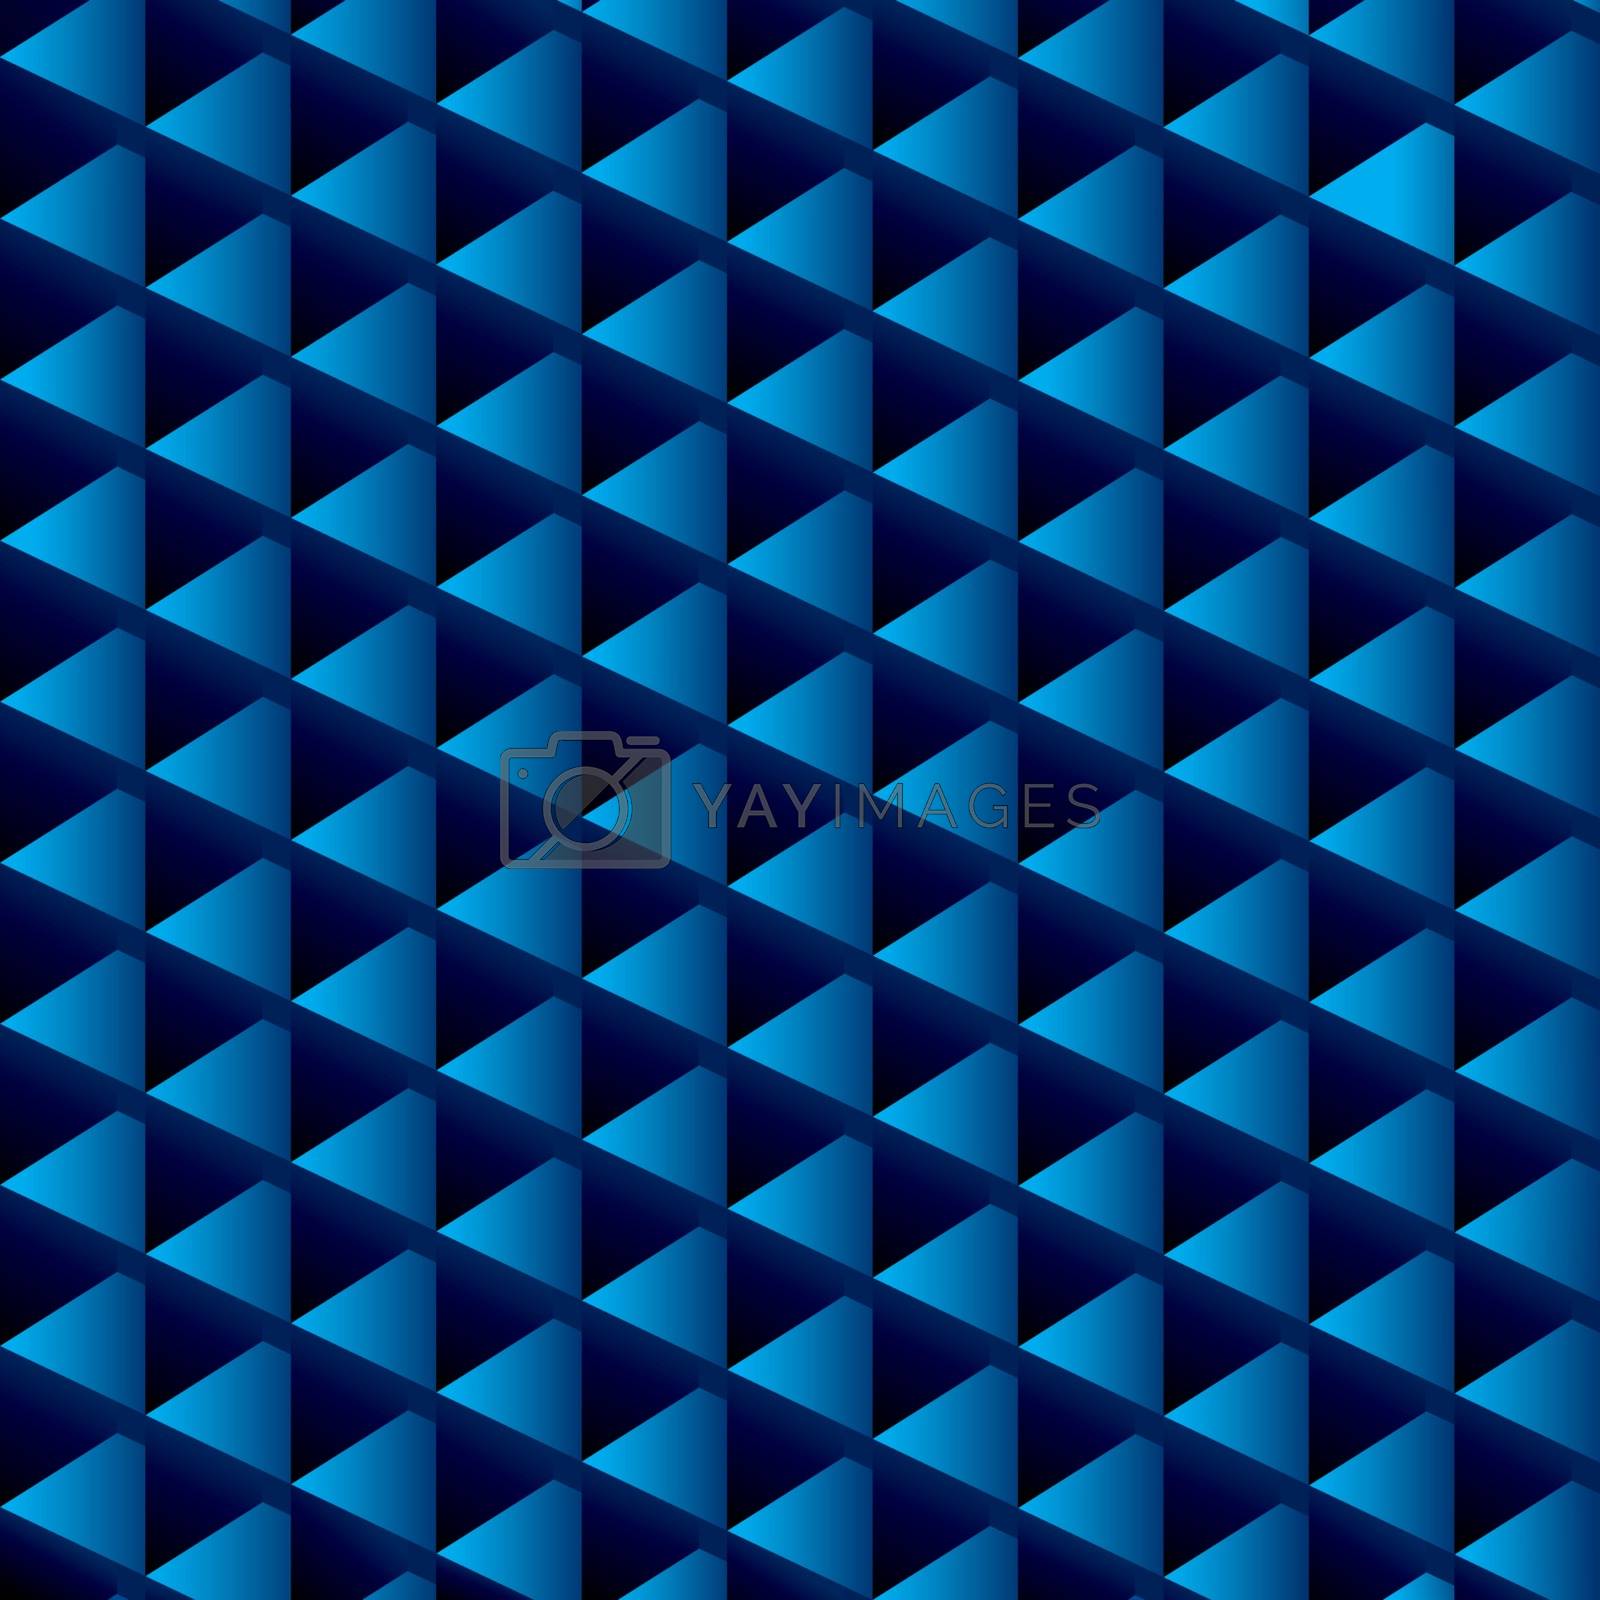 Royalty free image of creative triangle blue pattern background by vectoraart